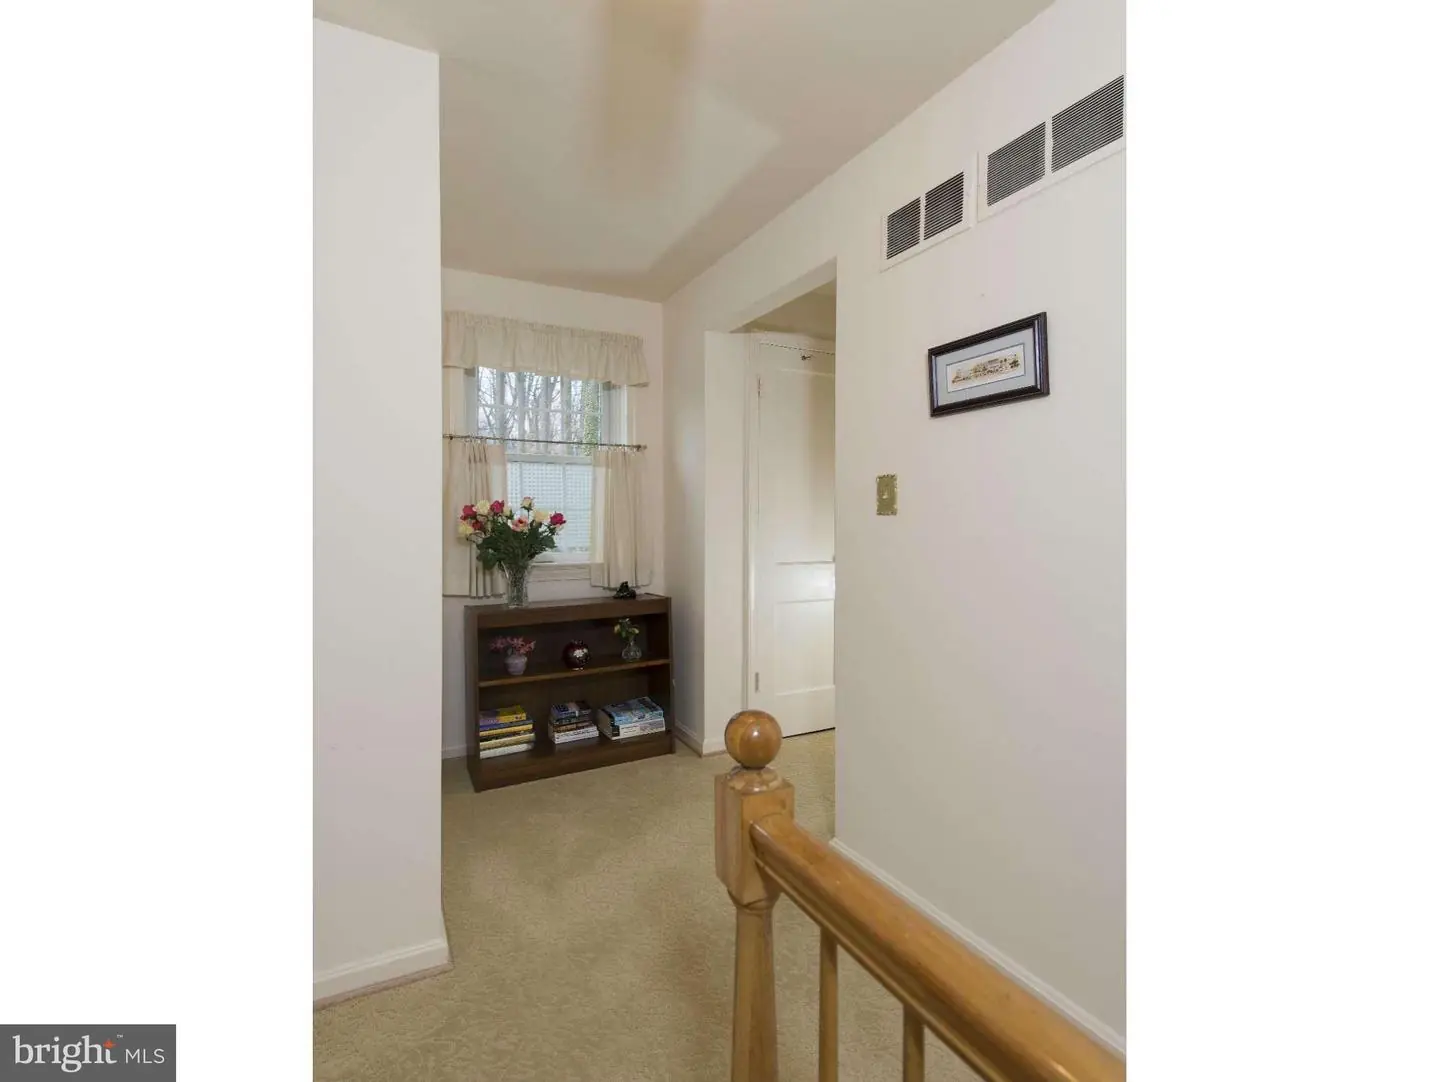 1002853862-300795237924-2021-09-07-11-45-06  |   | Falls Church Delaware Real Estate For Sale | MLS# 1002853862  - Best of Northern Virginia